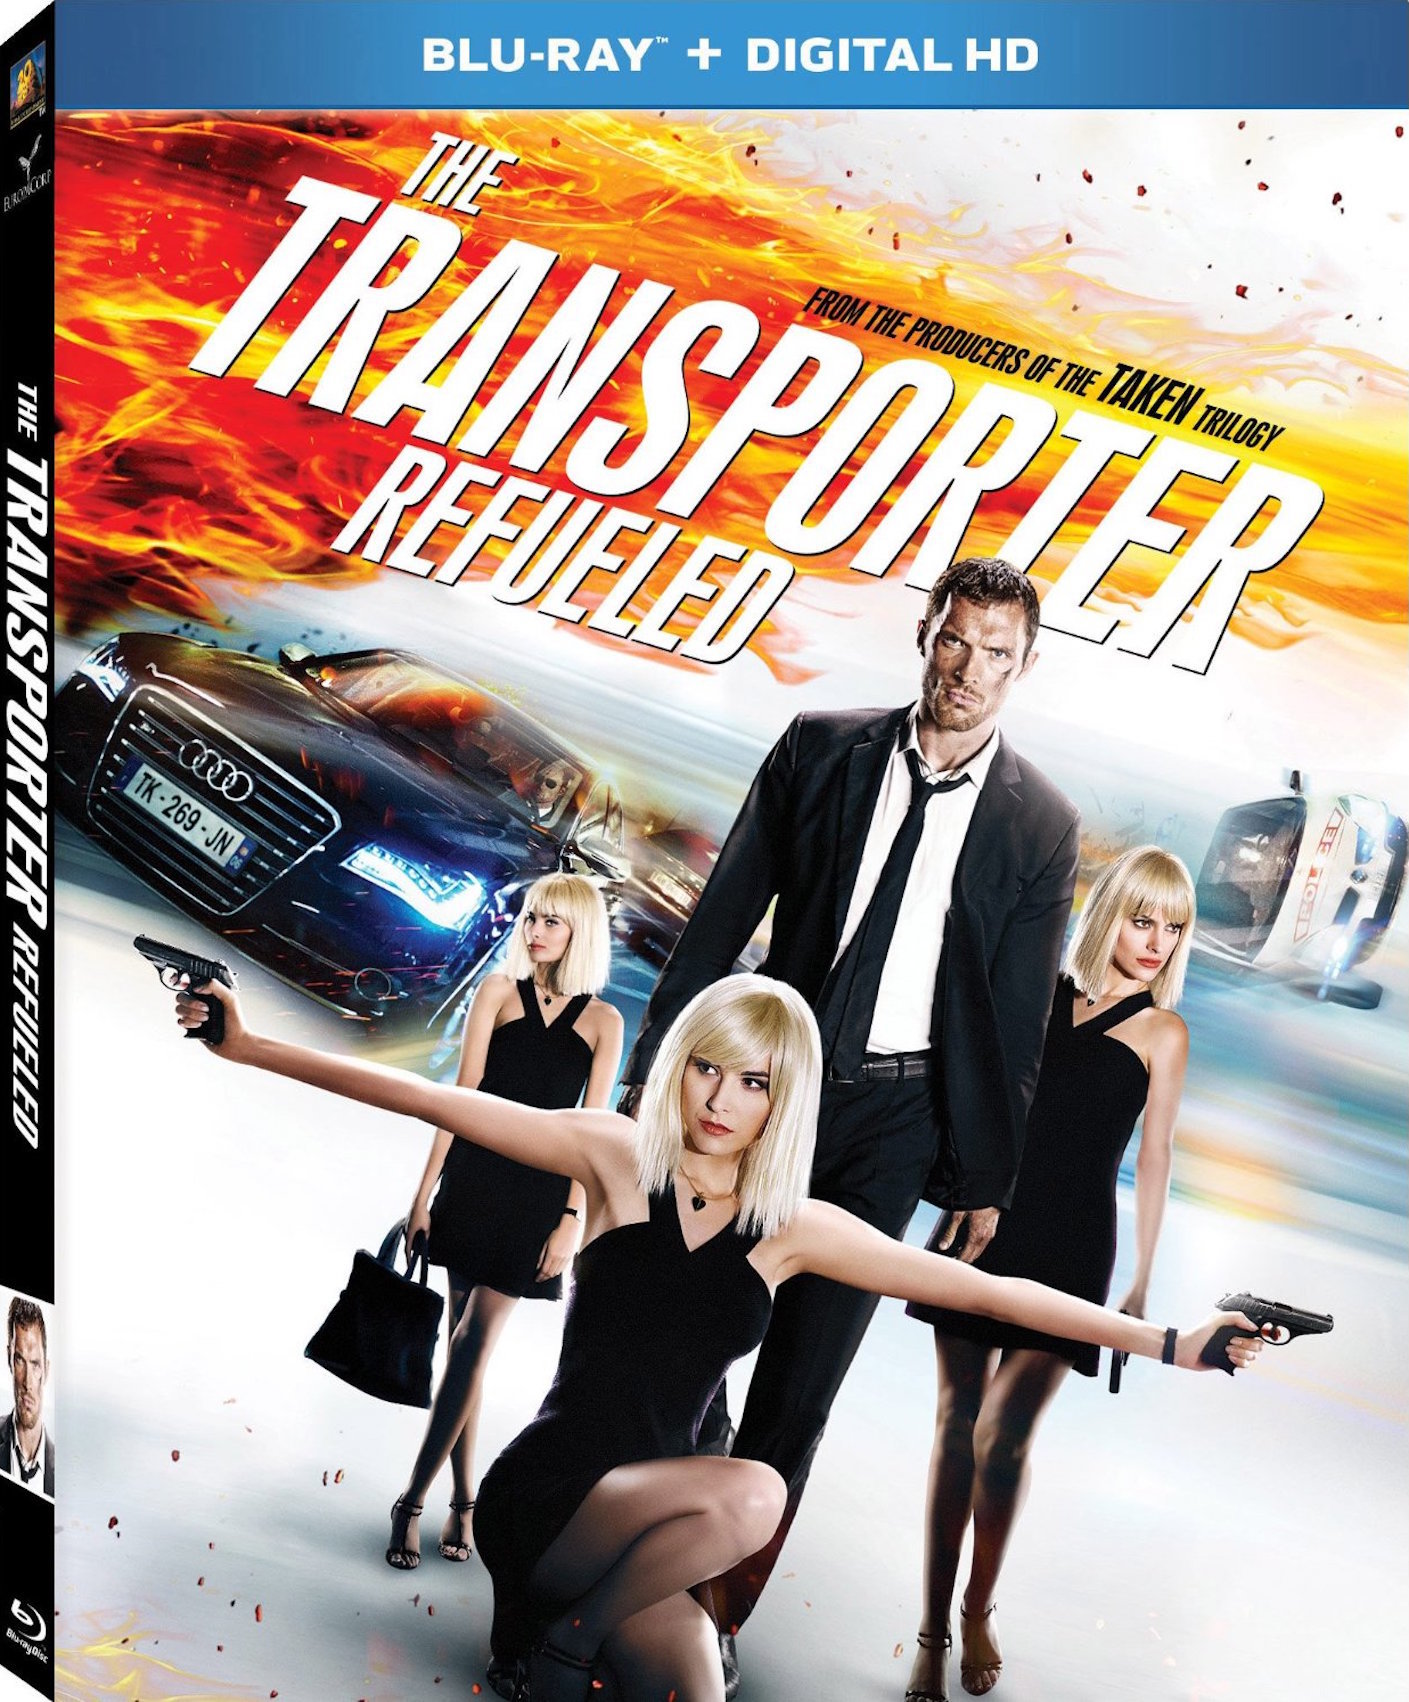 The Transporter Refueled #3